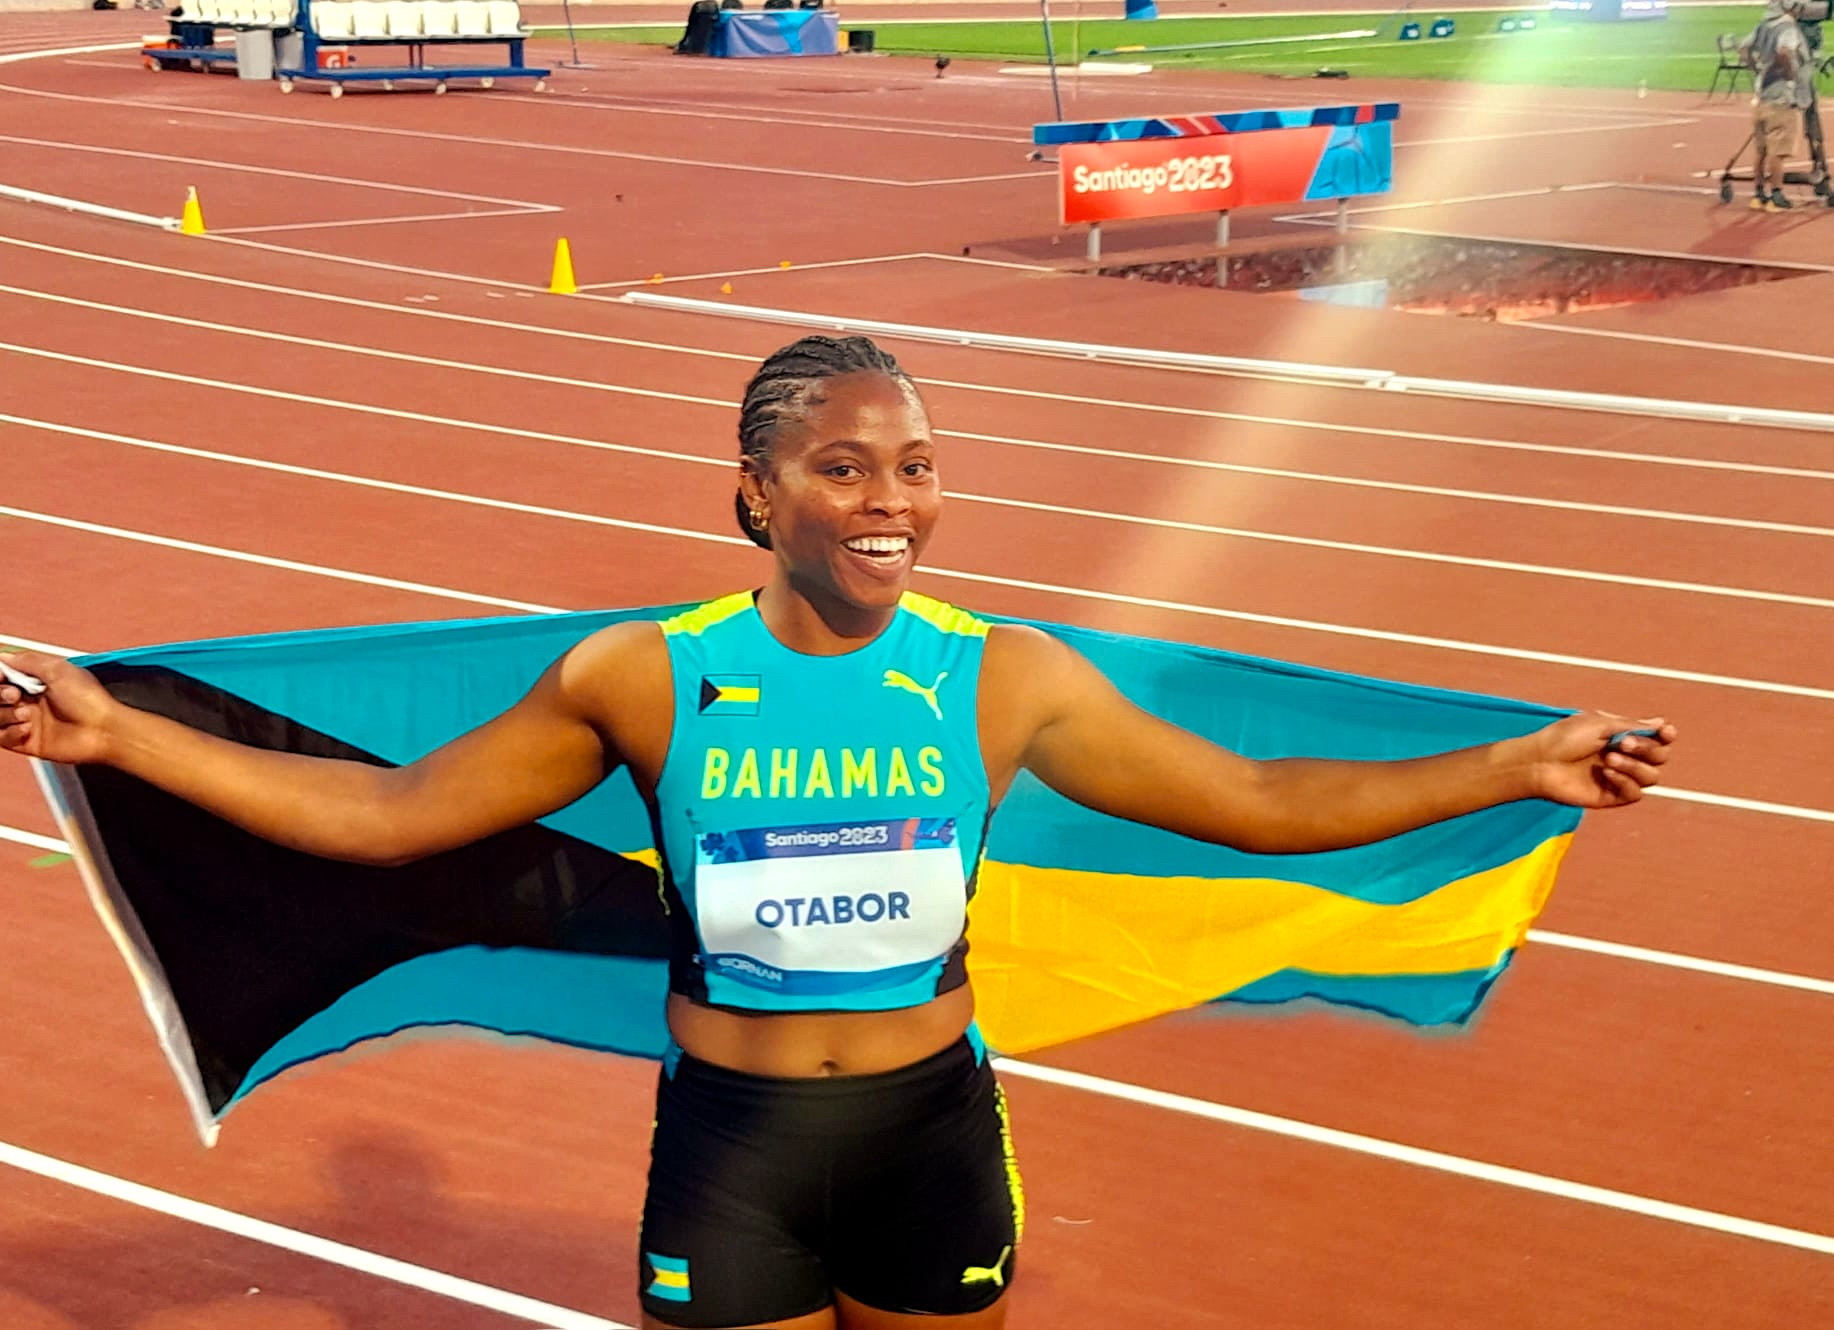 Rhema Otabor won a silver medal in the javelin for the Bahamas at the 2023 Pan American Games. GETTY IMAGES